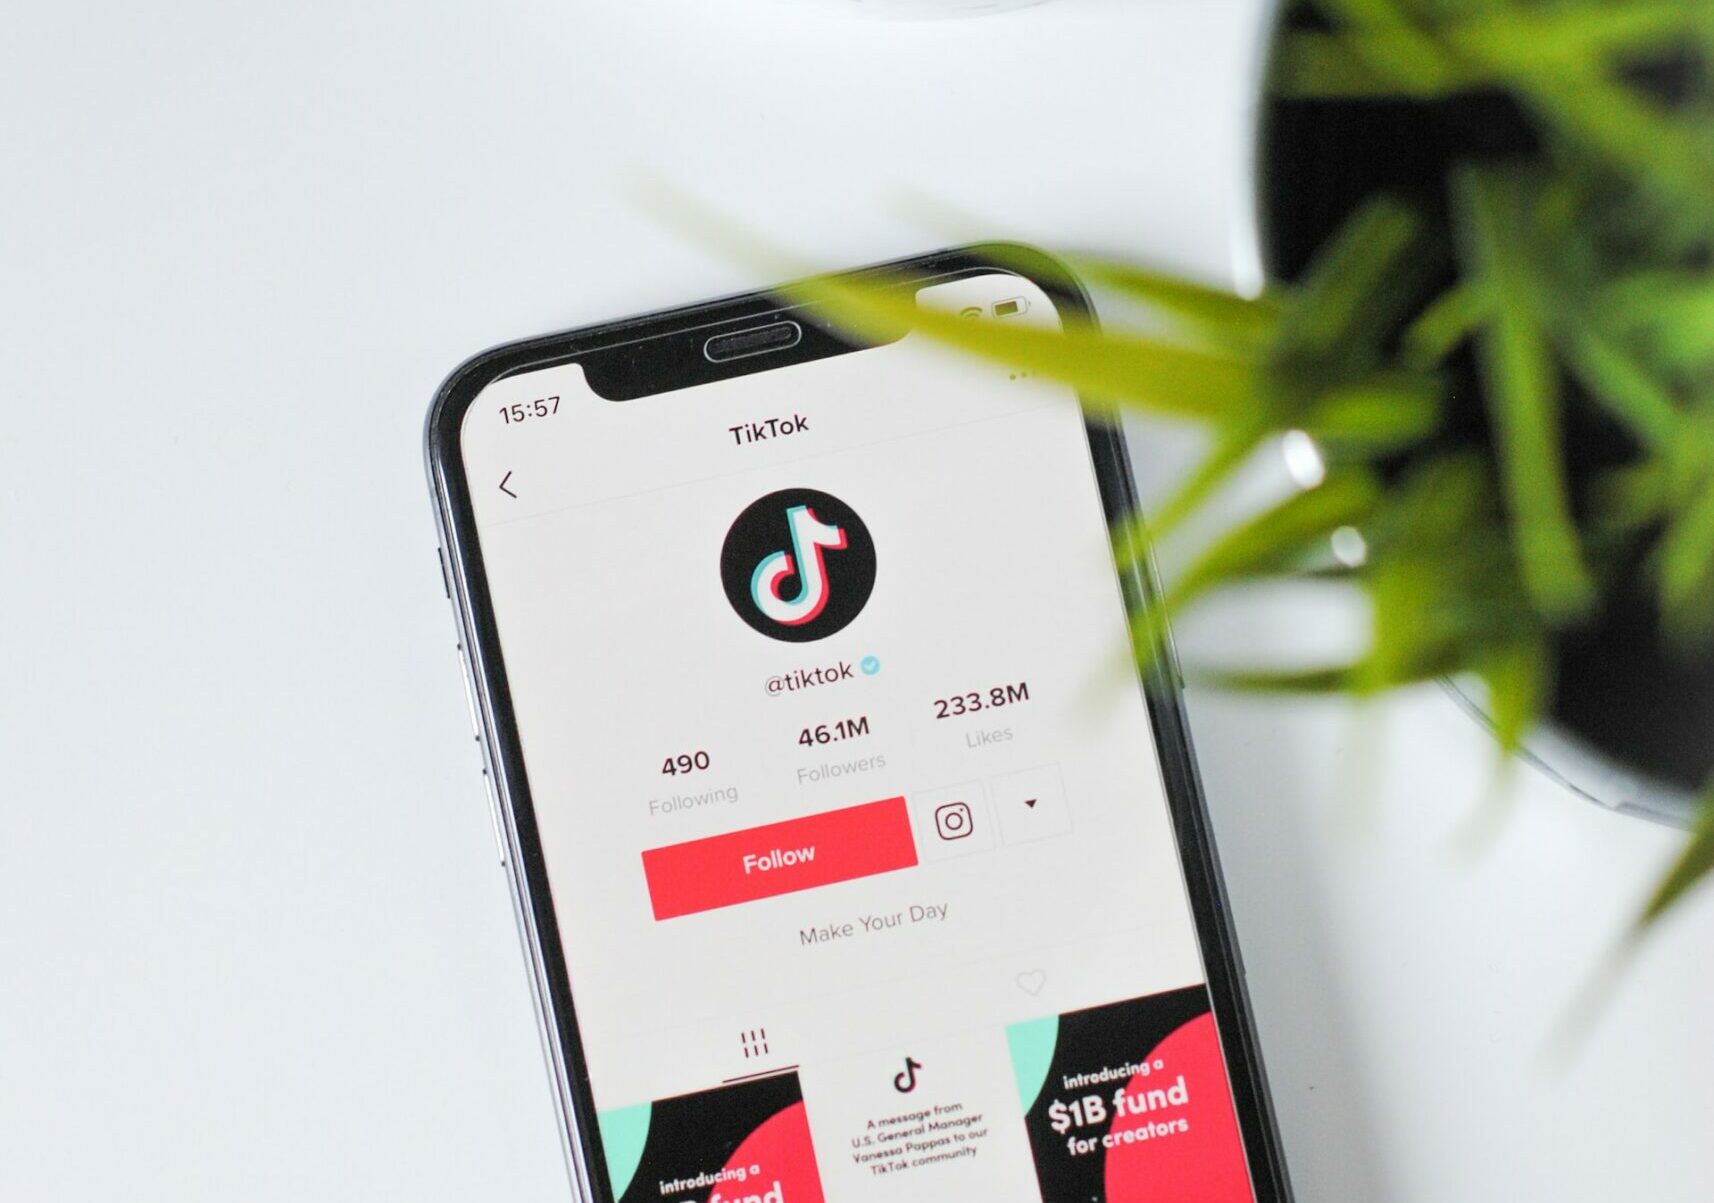 How to market your car business on TikTok